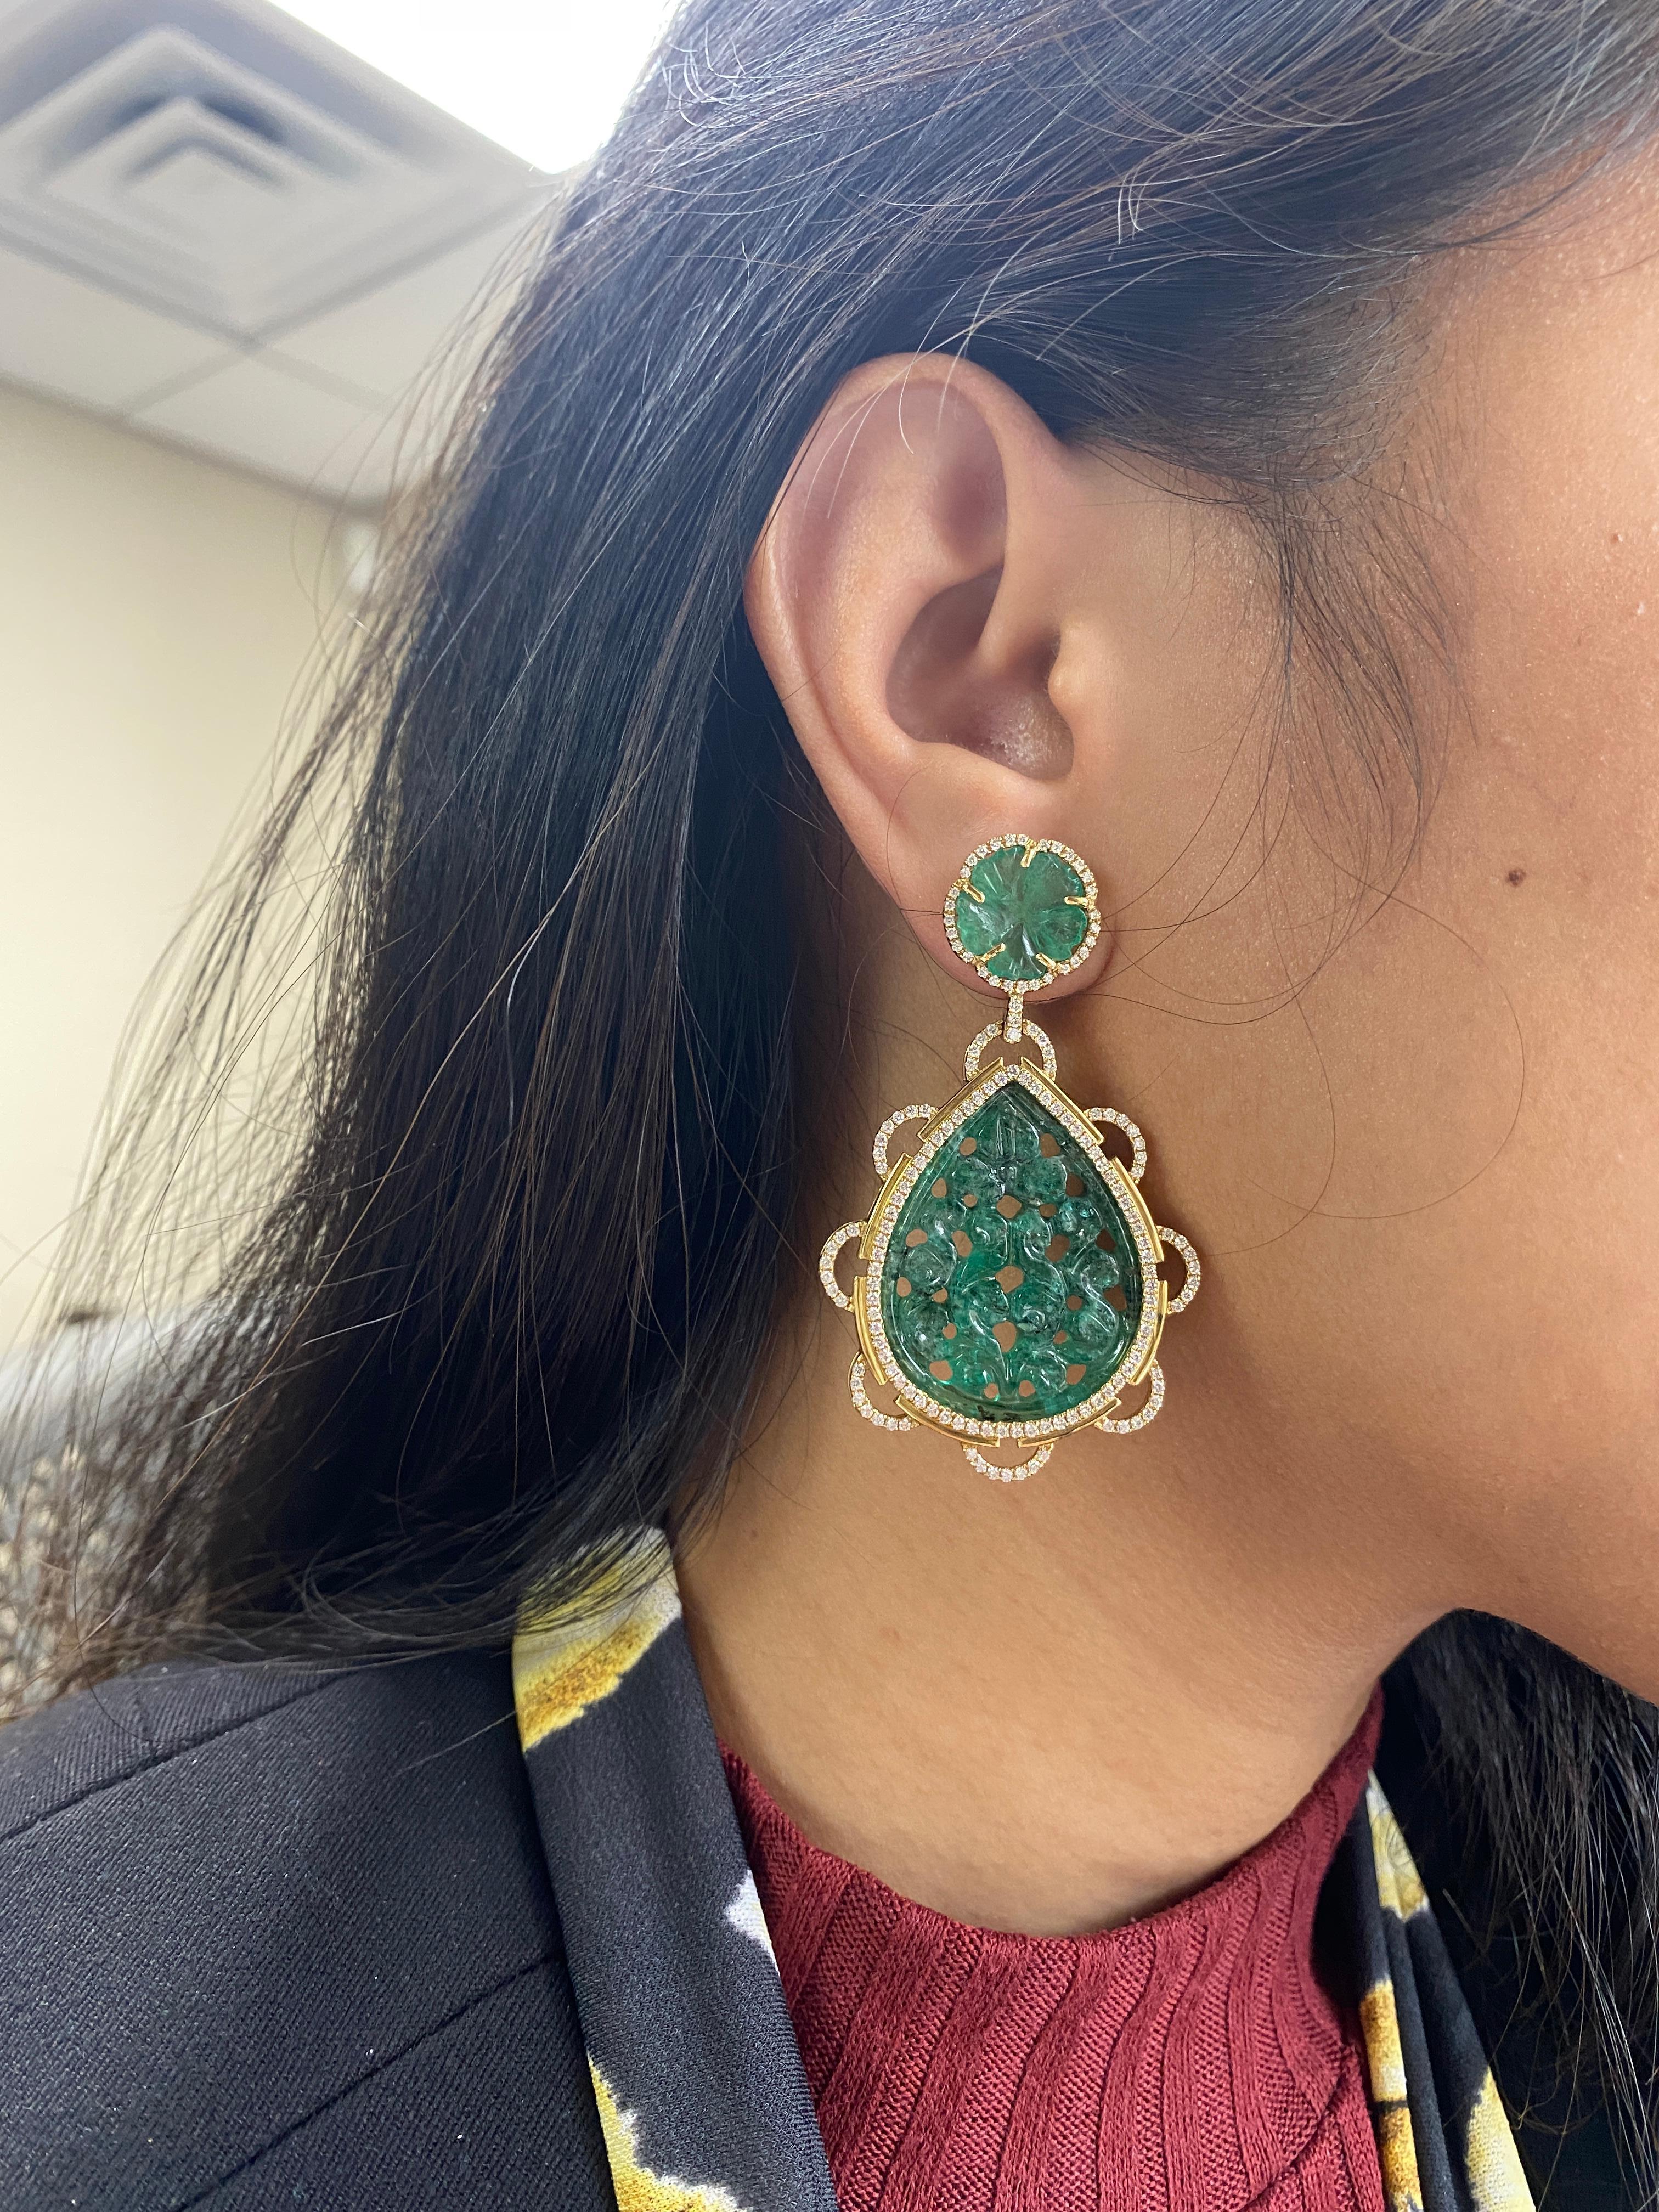 These one of a kind Emerald Carved with Carved Flower and Diamond Earrings are set in 18K Yellow Gold. They are part of our ‘G-One' Collection. If you want to make a statement, this is a perfect piece to do it!

Gemstone: 100% Earth Mined 
Approx.